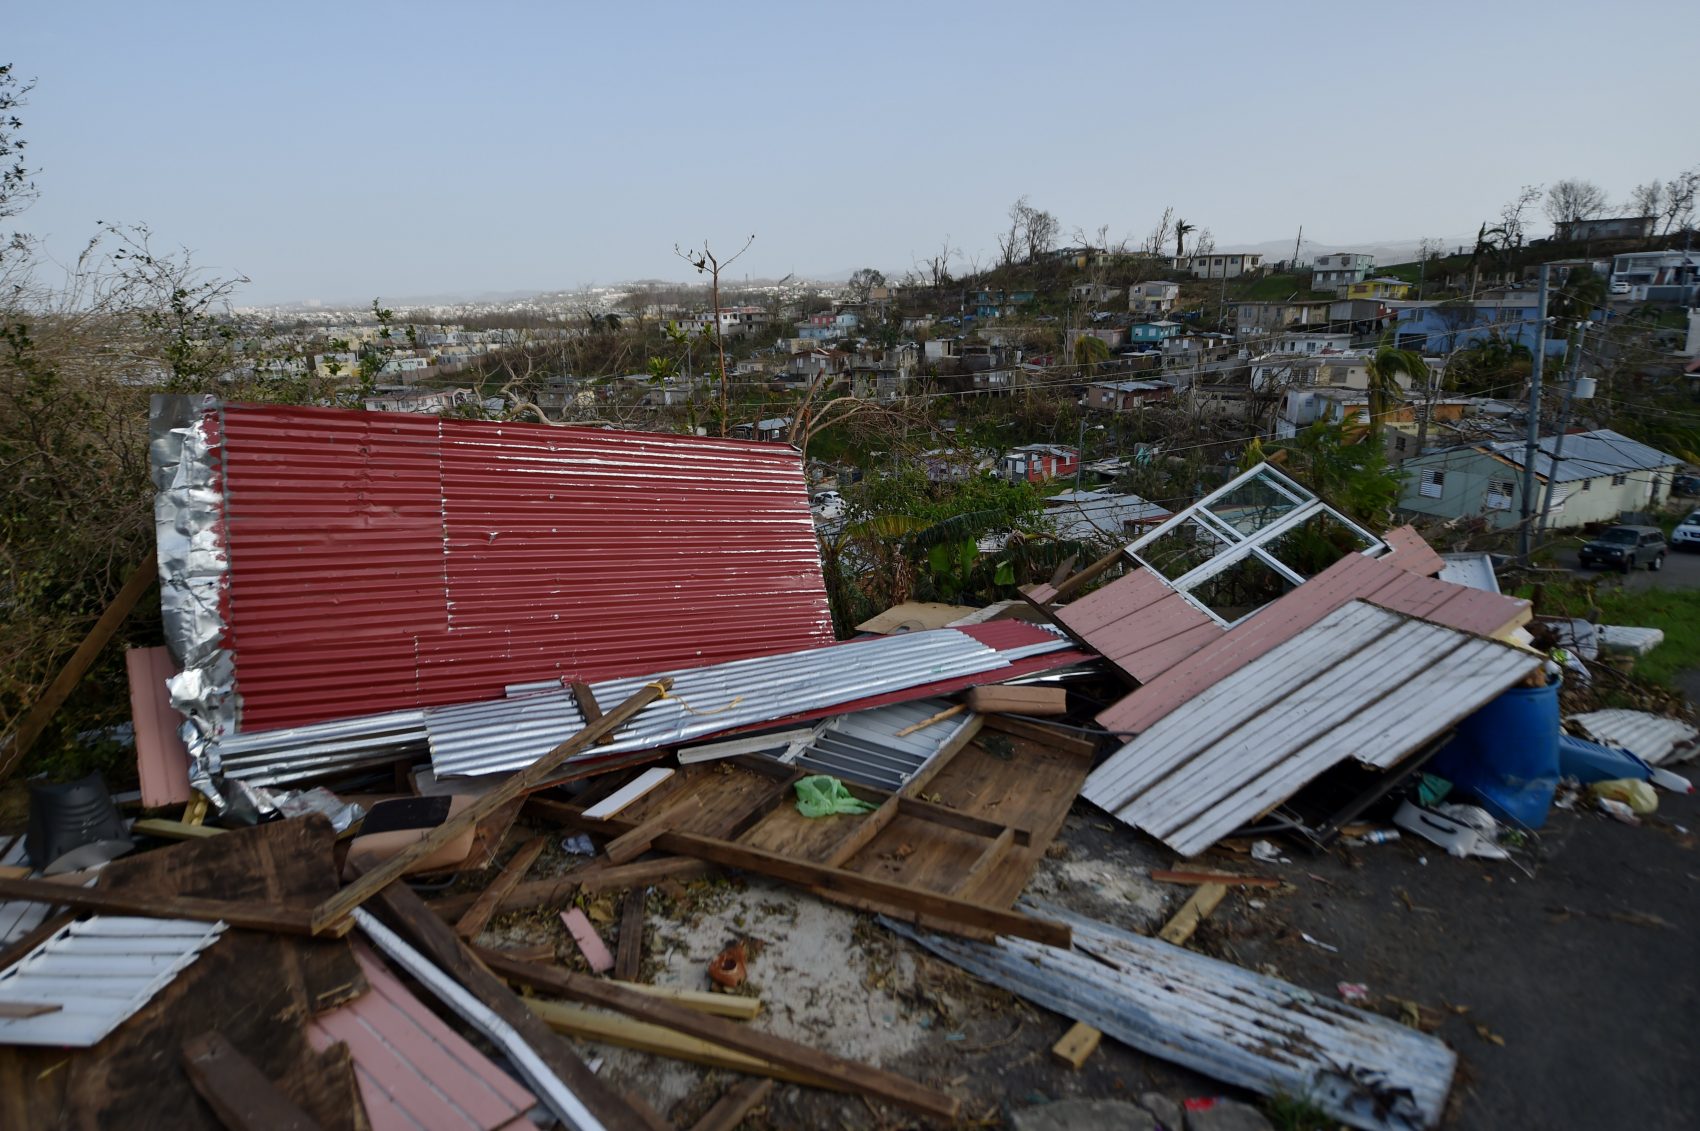 Destroyed homes are seen following the passage of Hurricane Maria in the neigborhood of Acerolas in Toa Alto, Puerto Rico, on Sept. 26, 2017. (Hector Retamal/AFP/Getty Images)